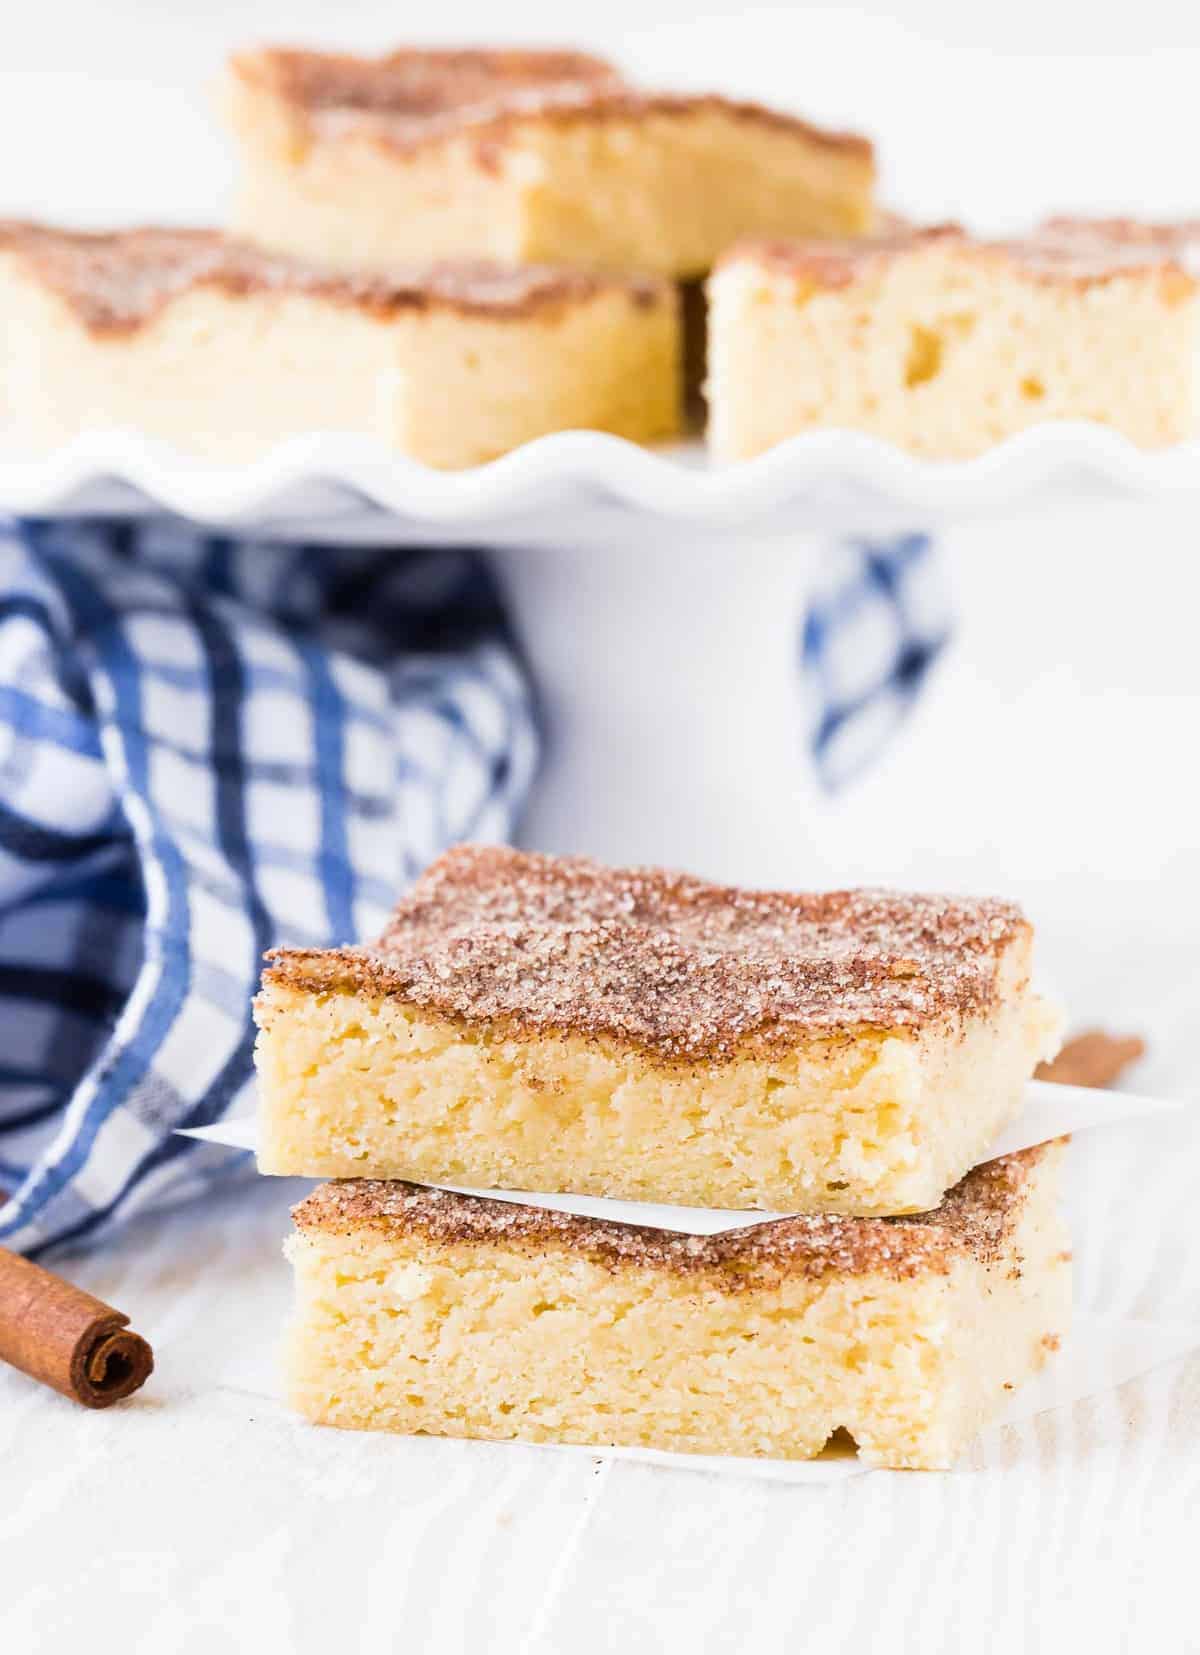 Two cinnamon sugar topped bars sitting in front of a small cake stand with more bars.